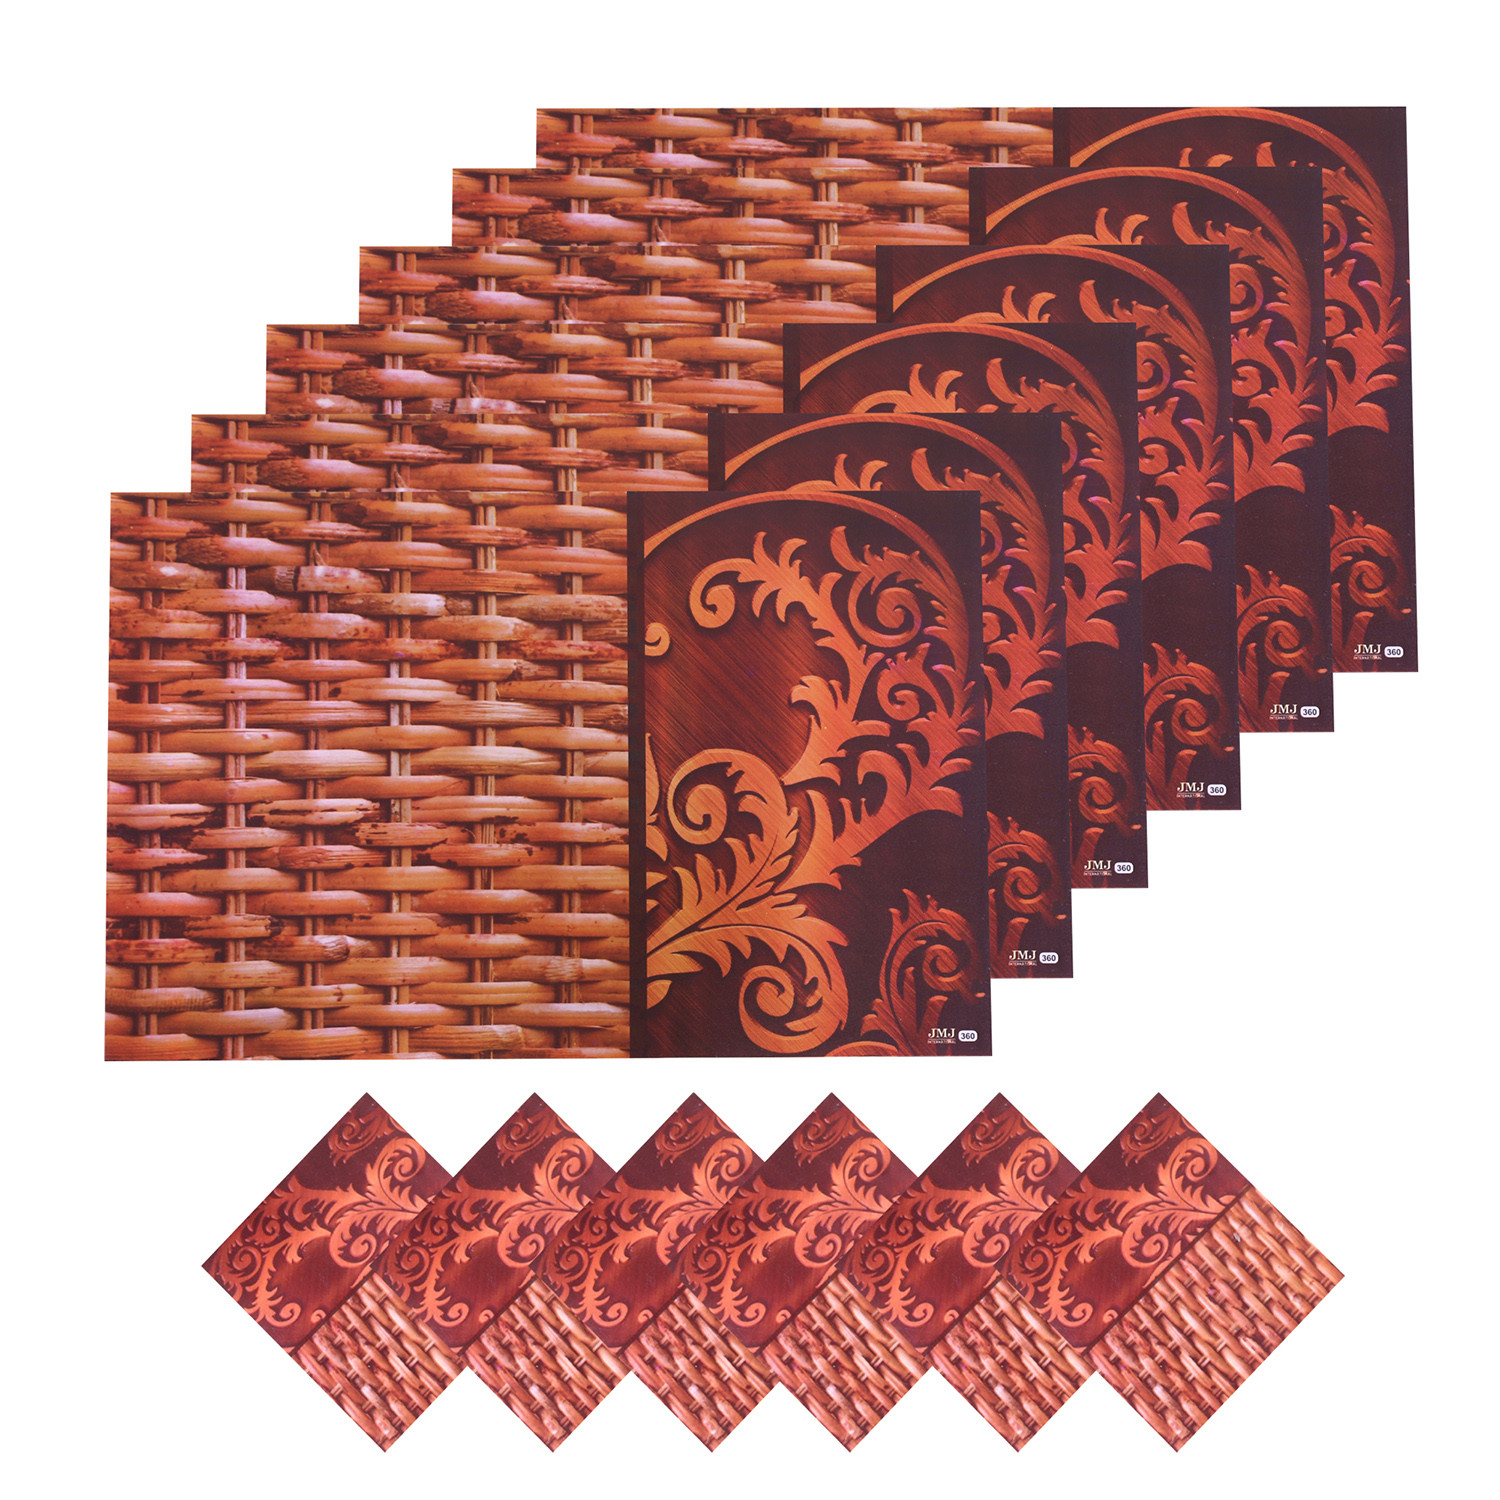 Kuber Industries Placemat | Table Placemats with Coasters | Table Placemats with Tea Coasters | Dining Table Placemats & Coasters Set | Rassa Placemat | 12 Piece Set | Brown